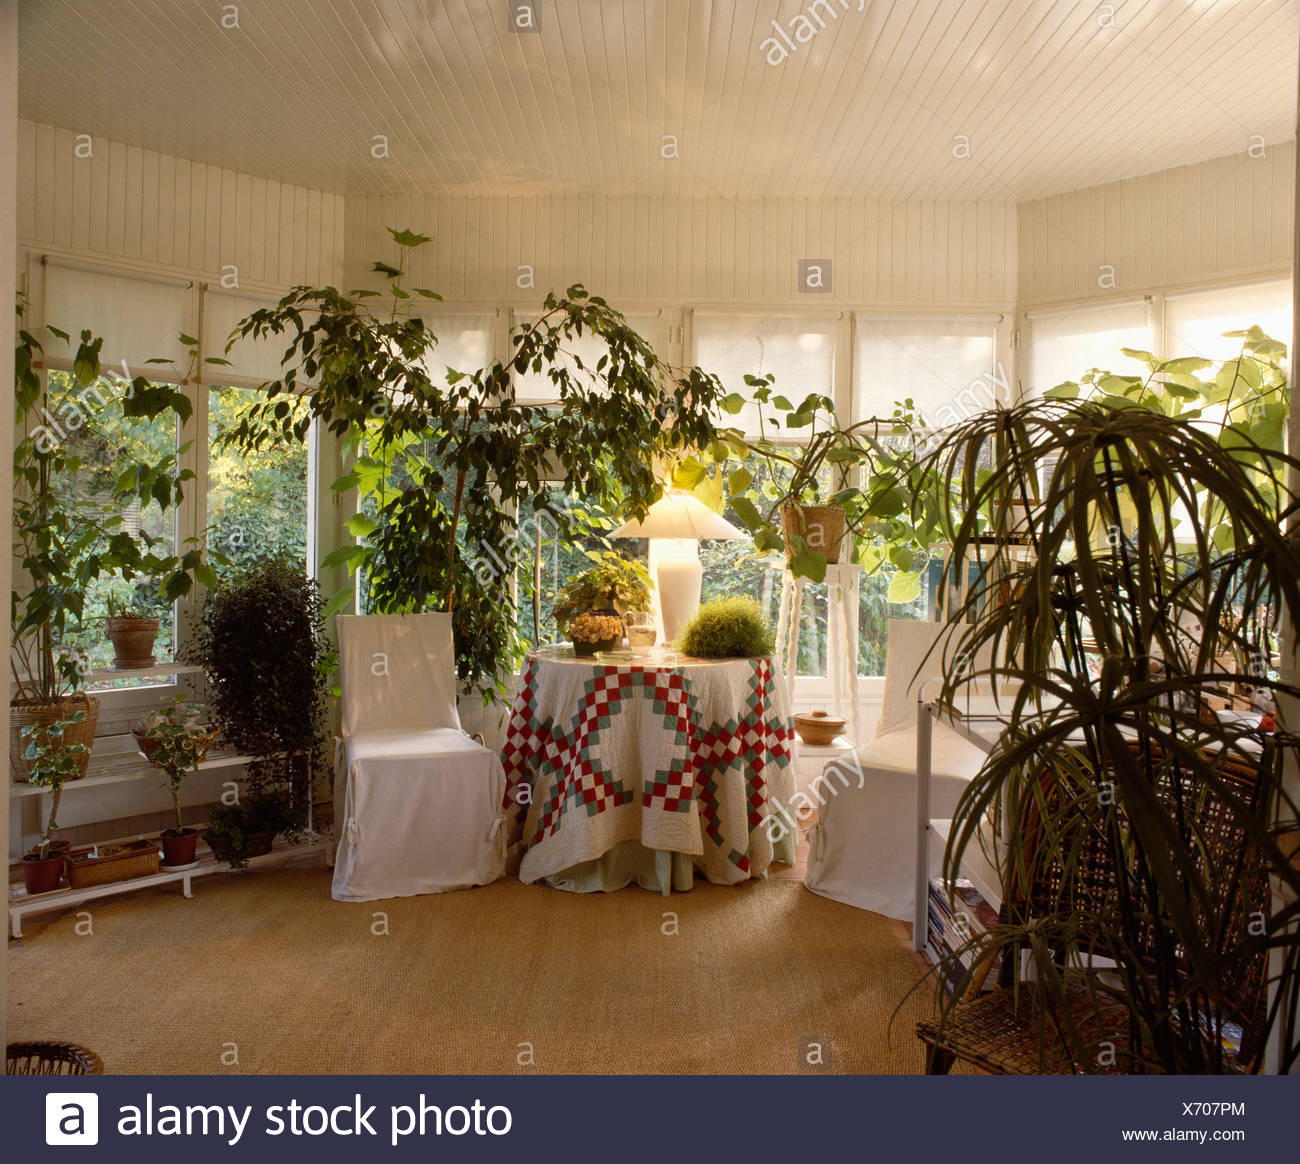 Tall Green Houseplants And Circular Table With Quilted